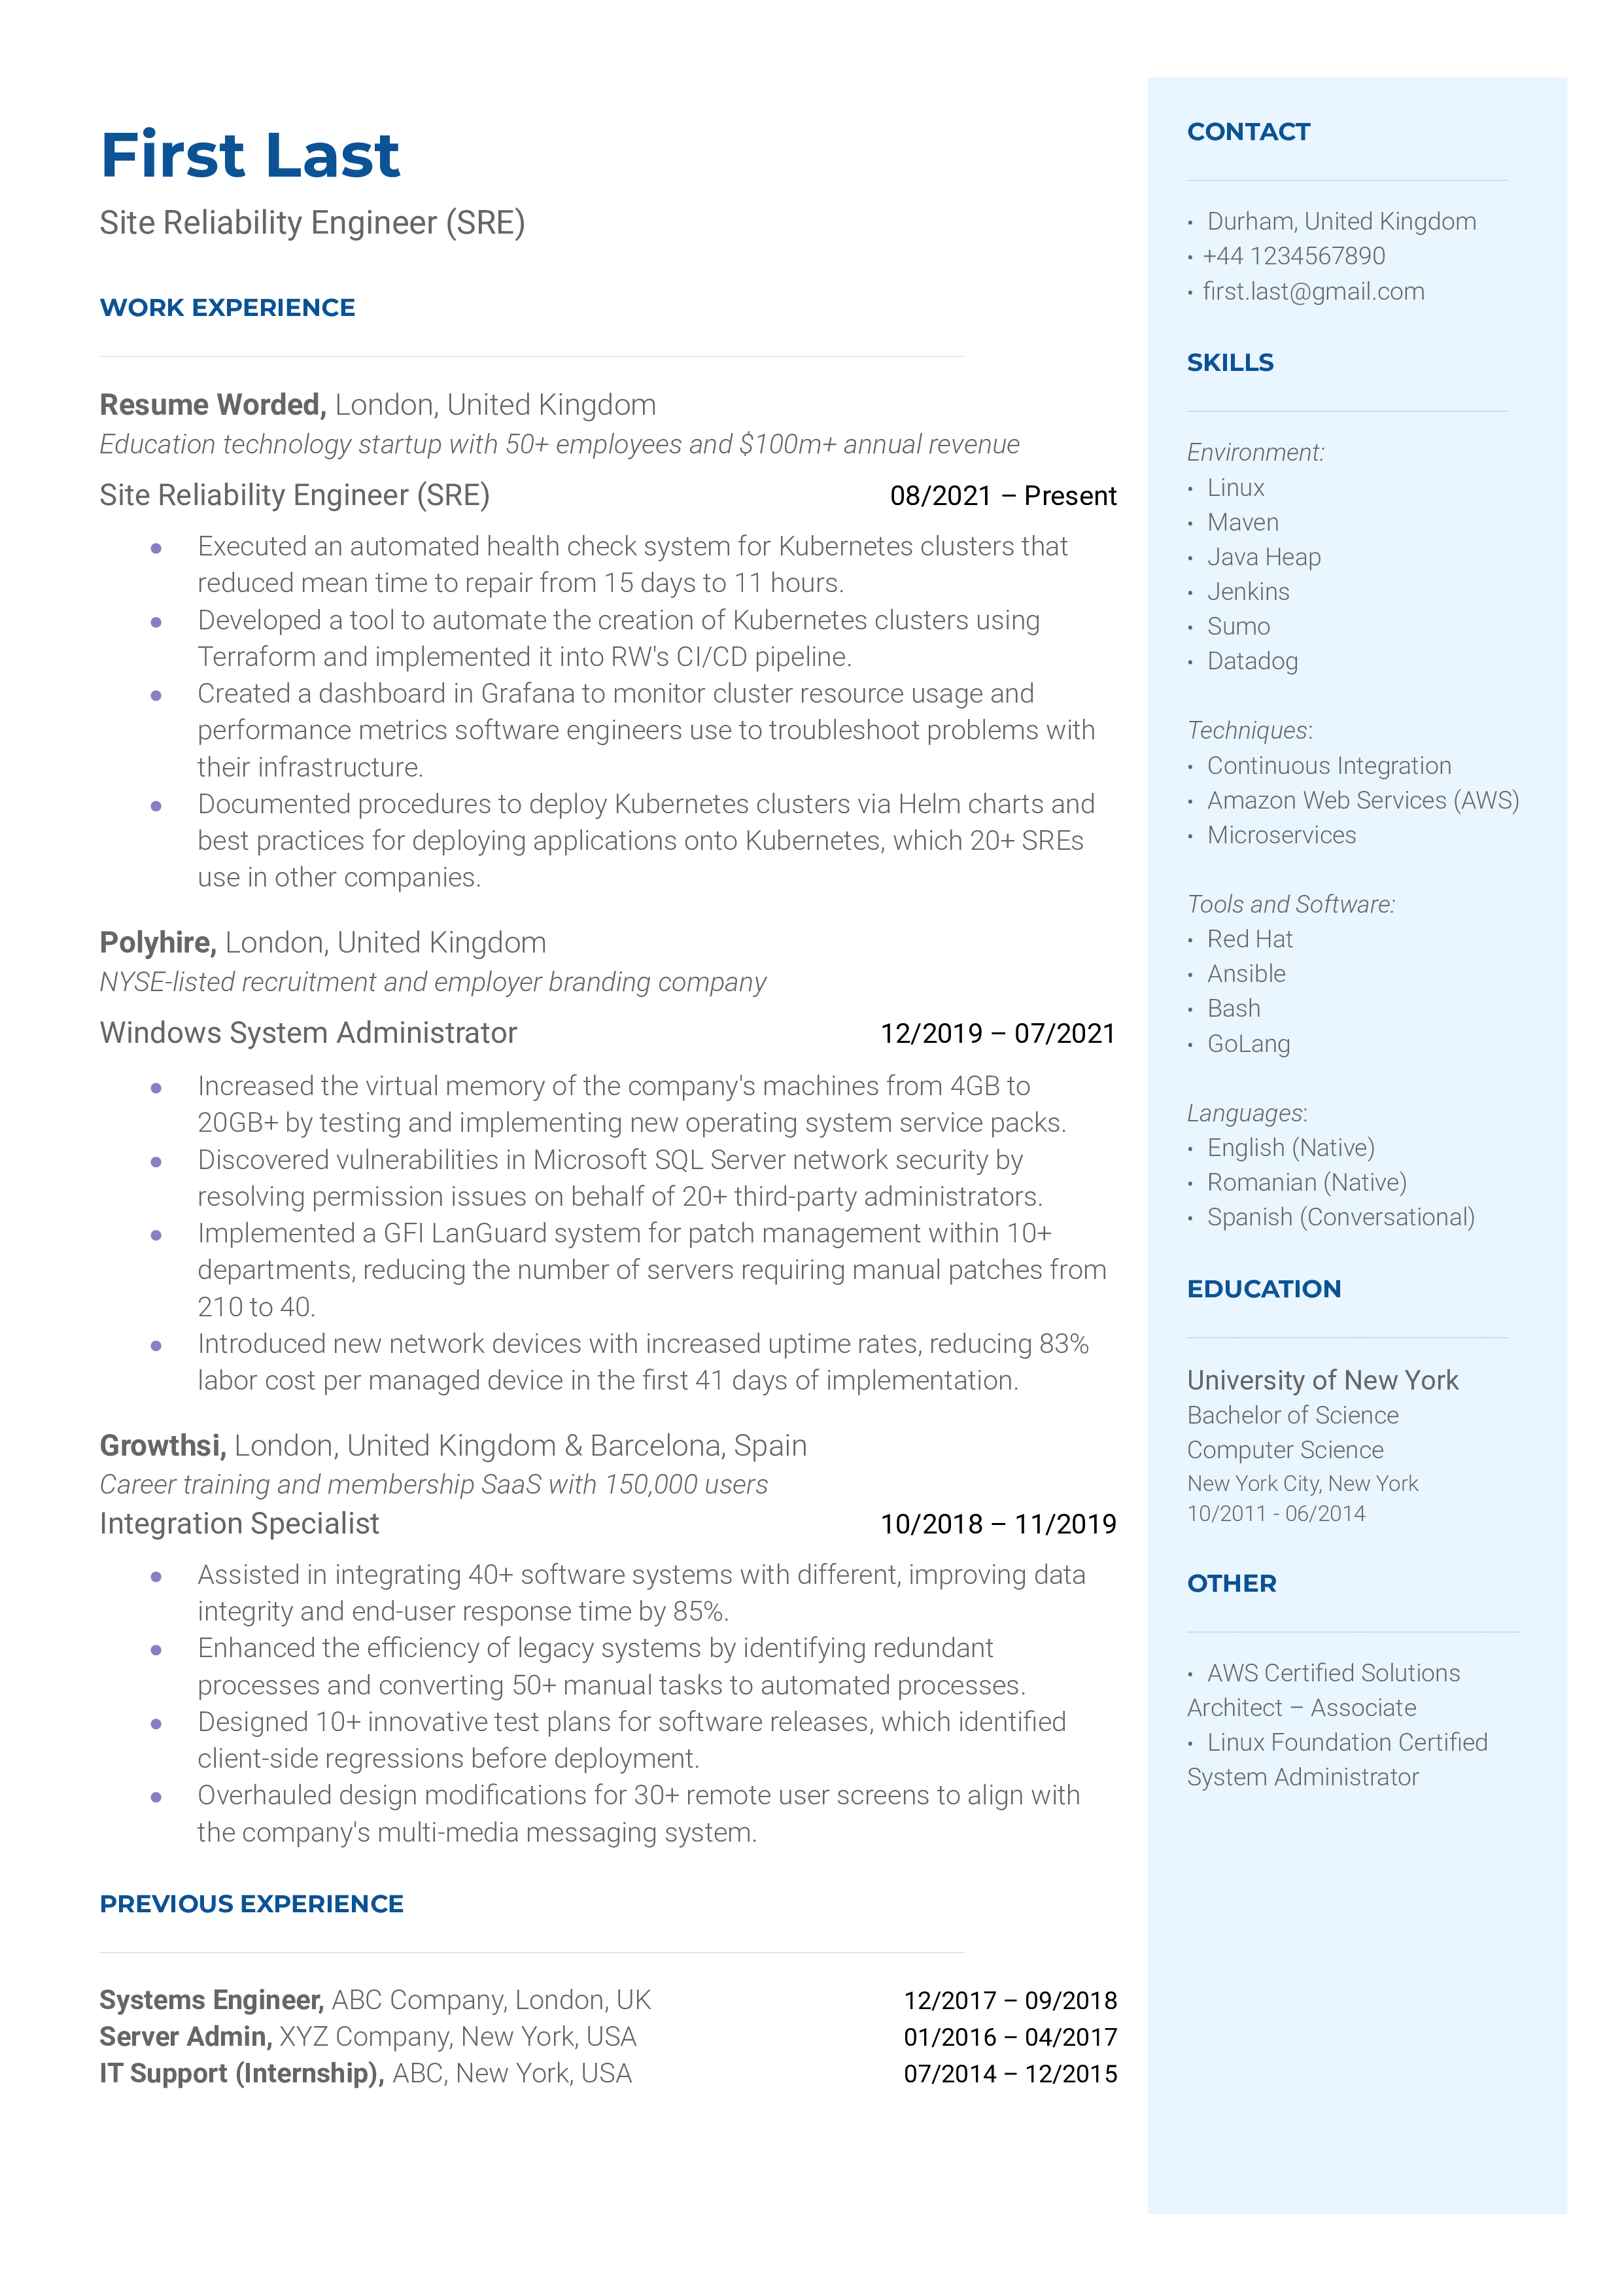 A site reliability engineer (SRE) resume template focused on hard skills. 